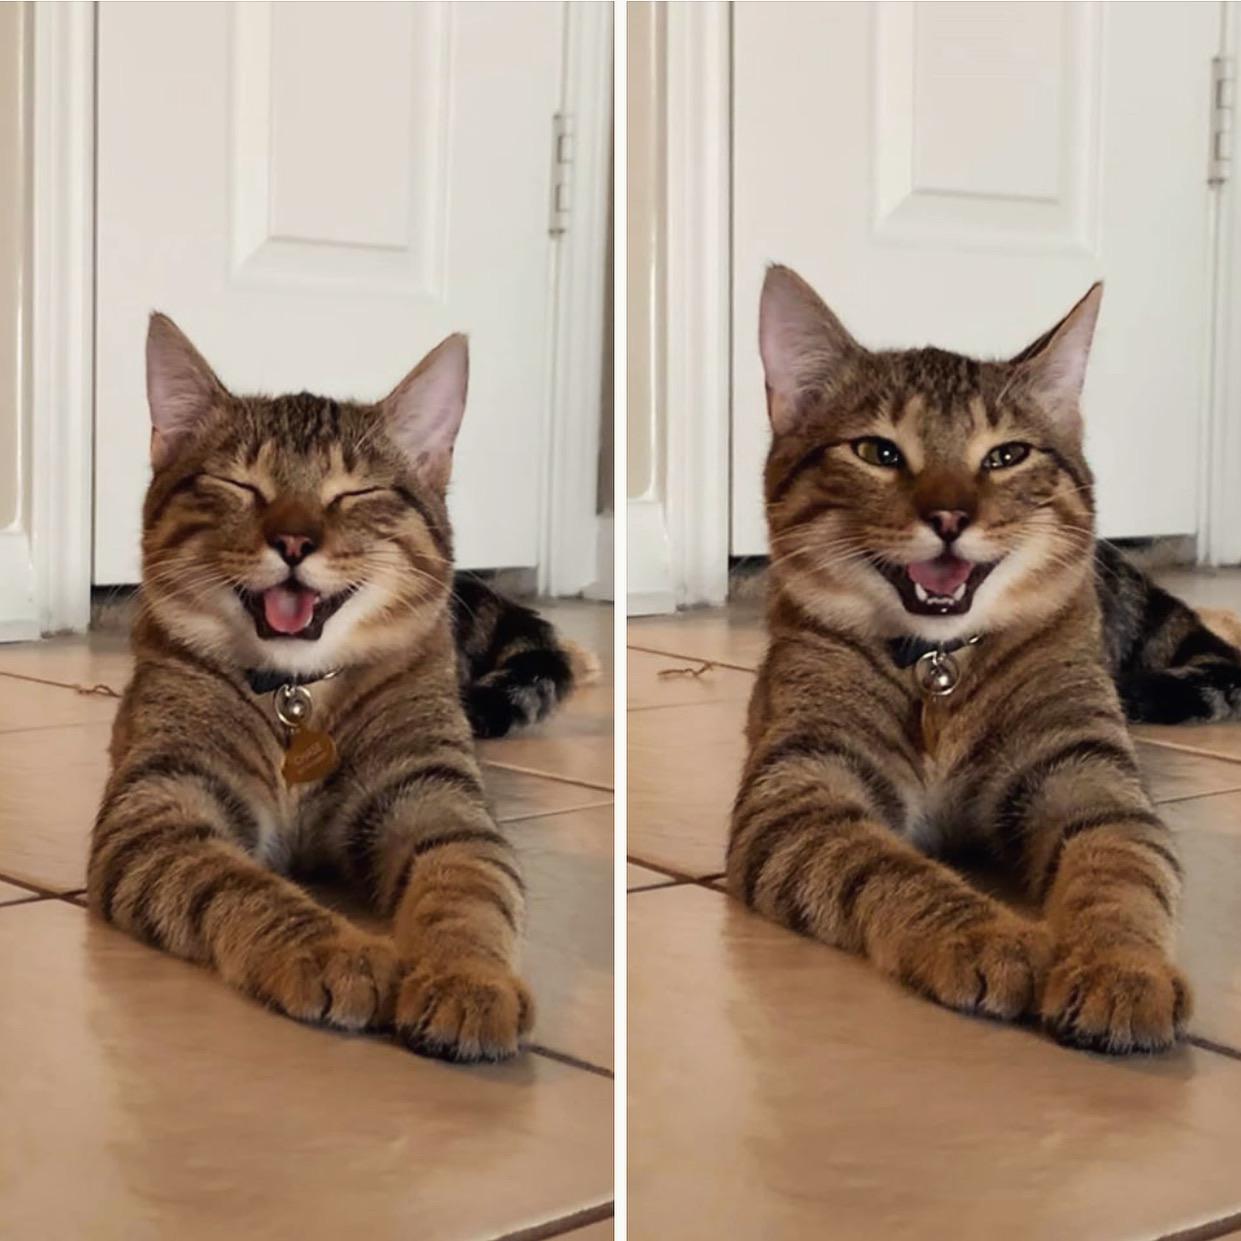 People Are Obsessed With Chestnut, A "Dad Joke" Cat